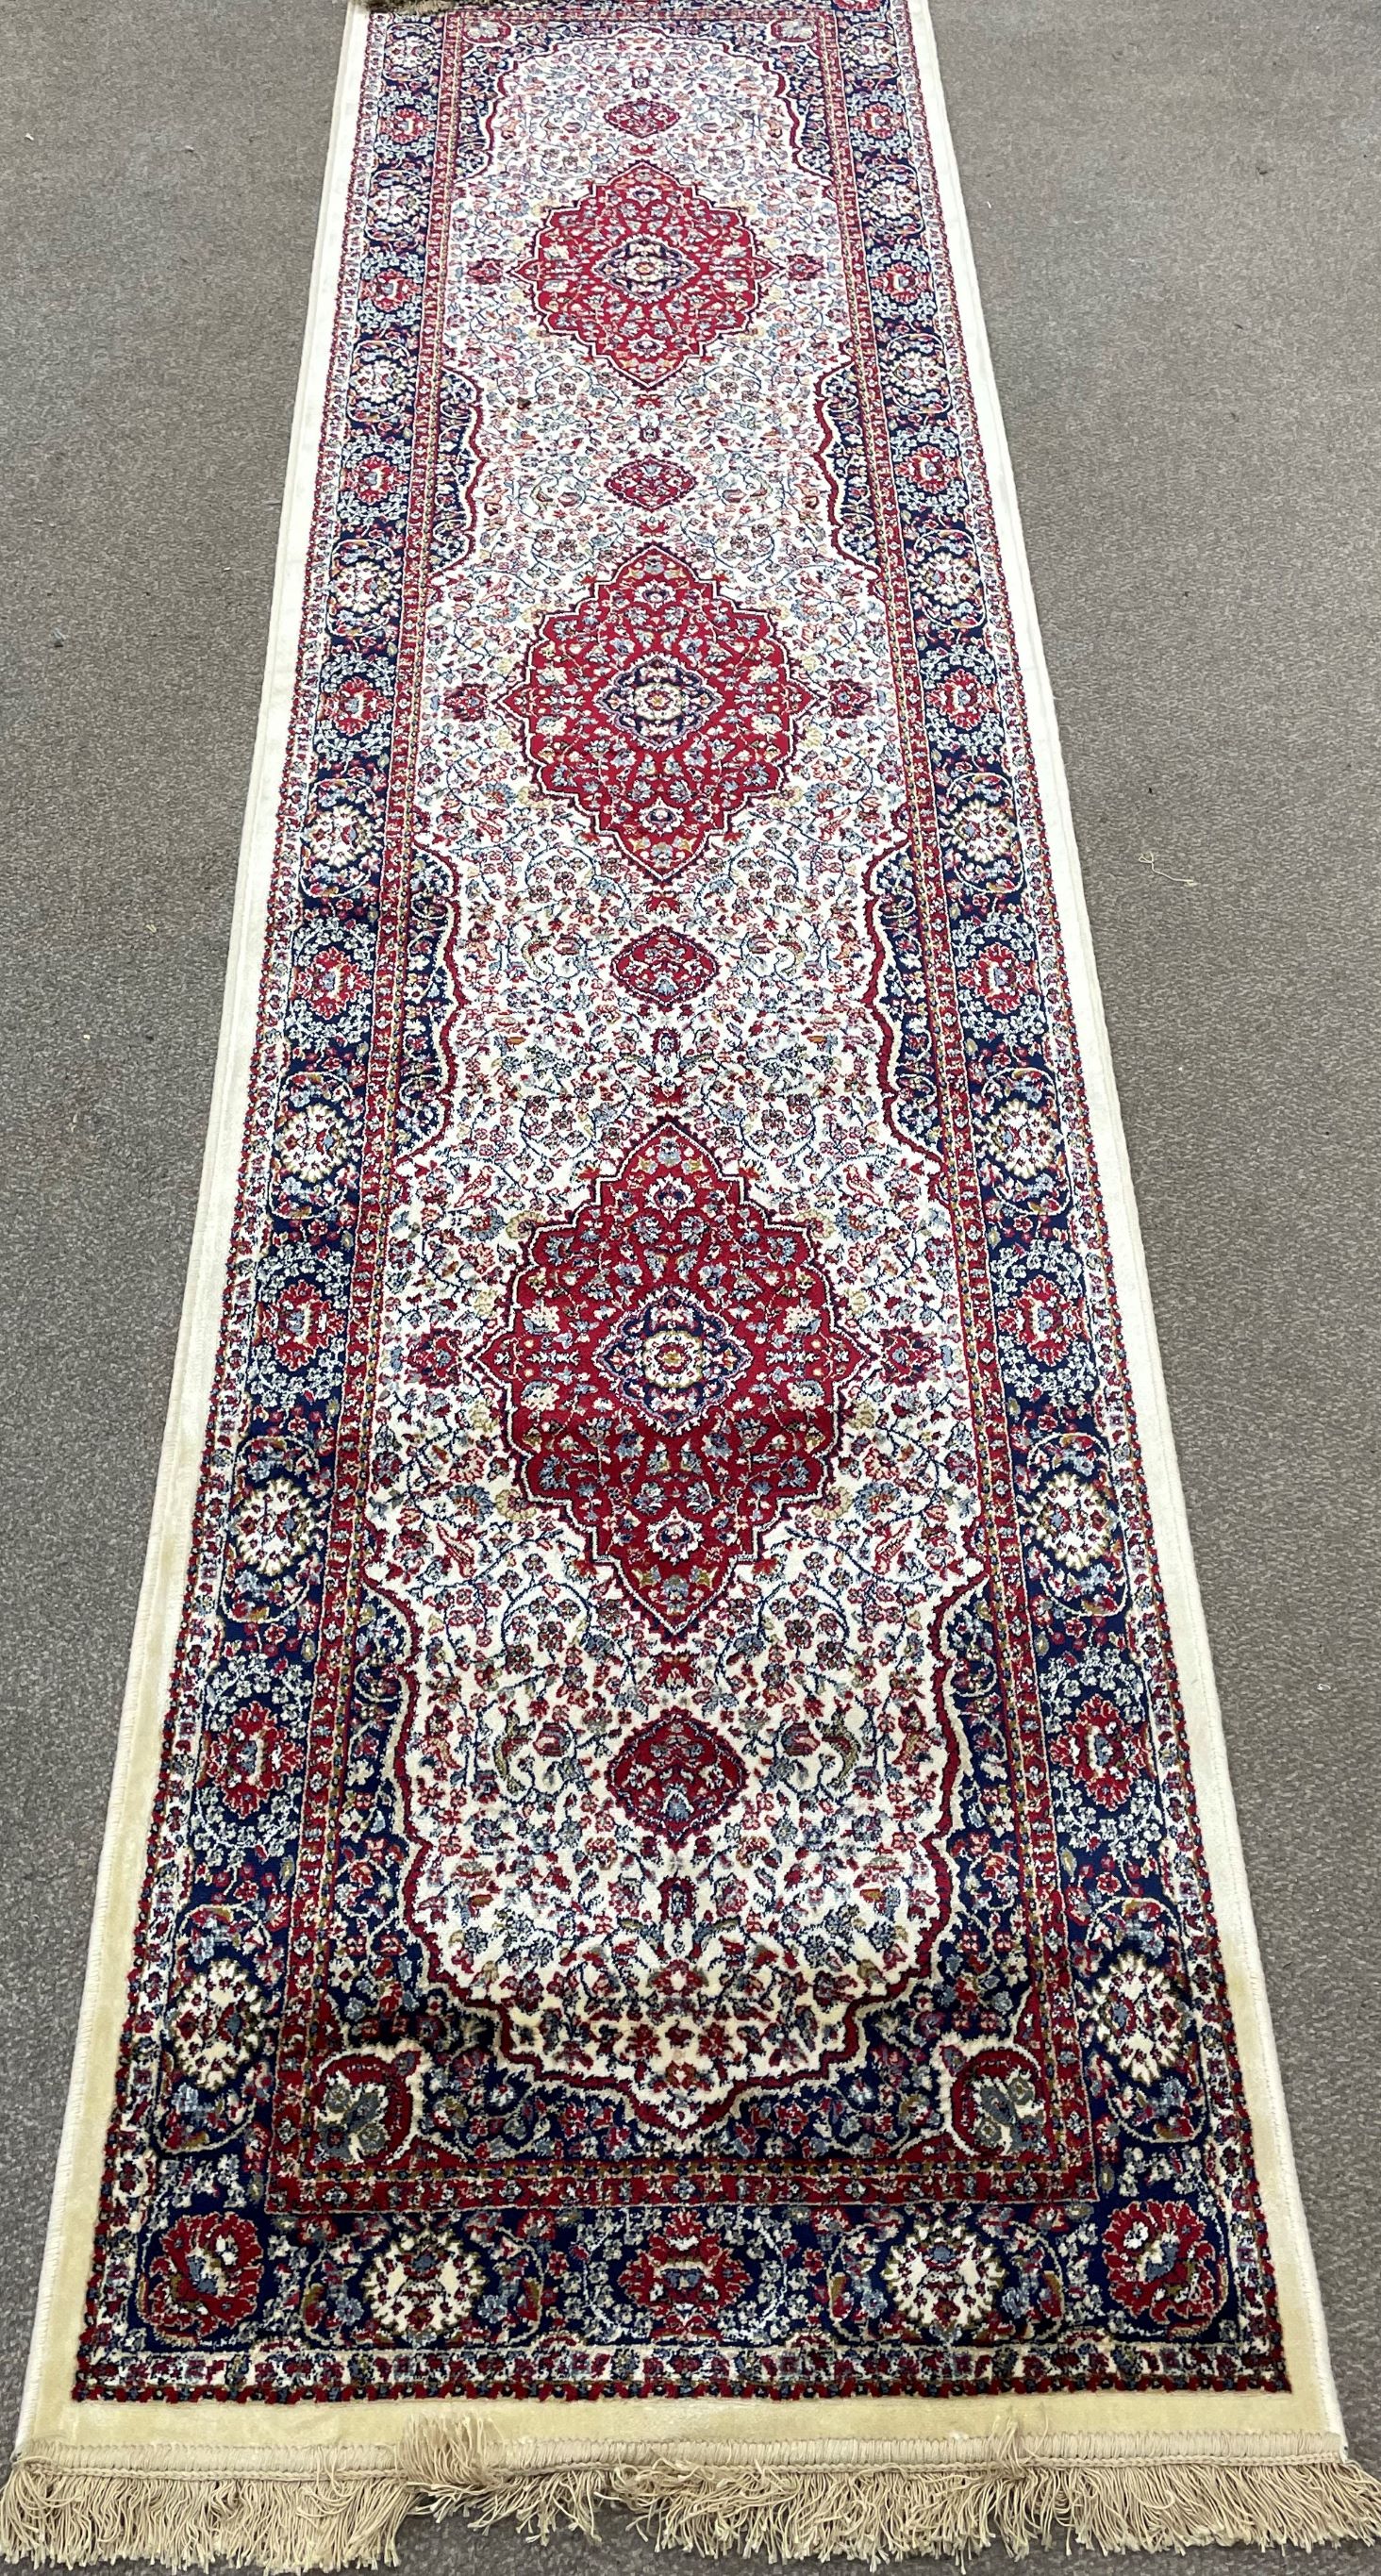 Ivory ground runner with floral medallion design 300cm by 80cm